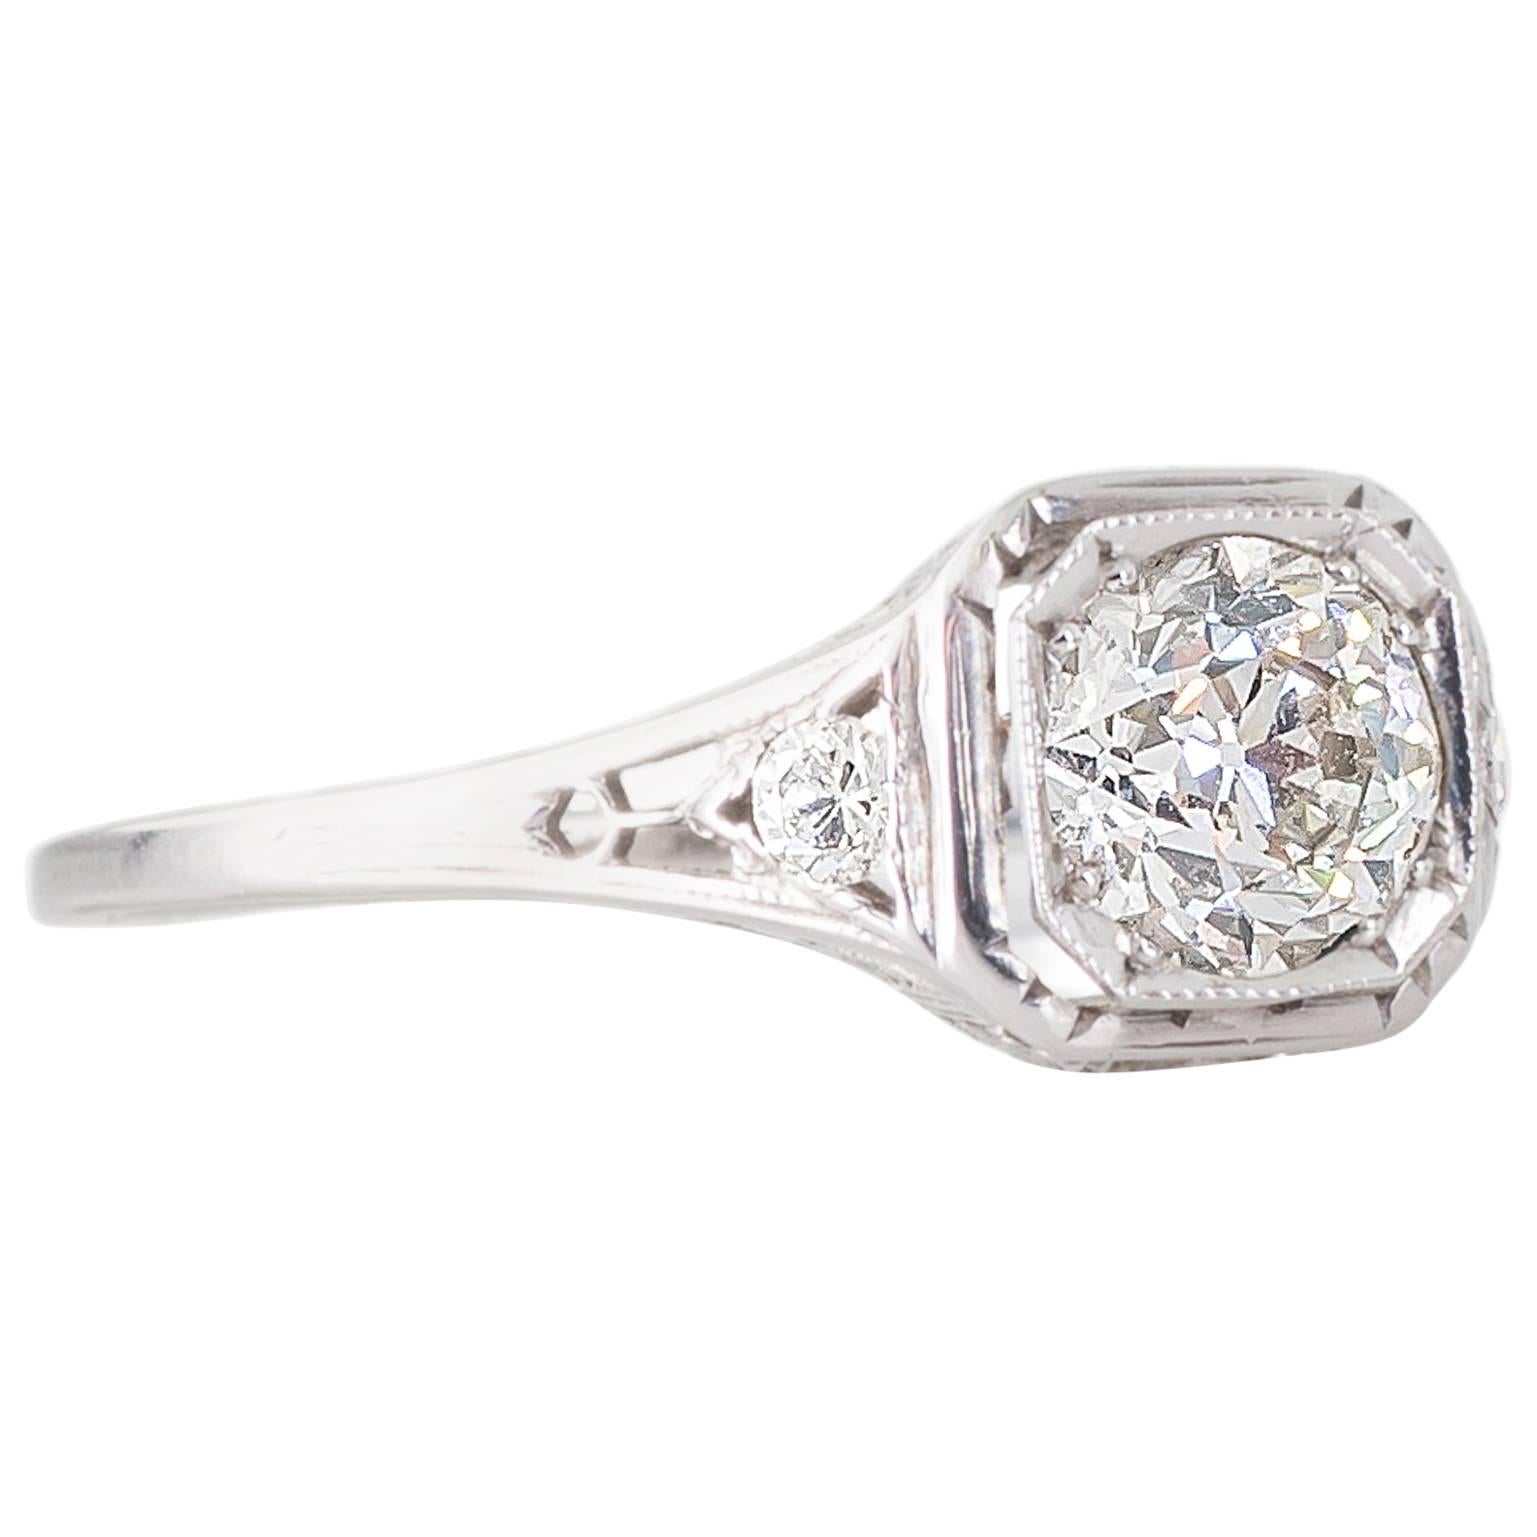 Art Deco 1.02 Carat Old Cut Diamond and Platinum Solitaire Ring For Sale